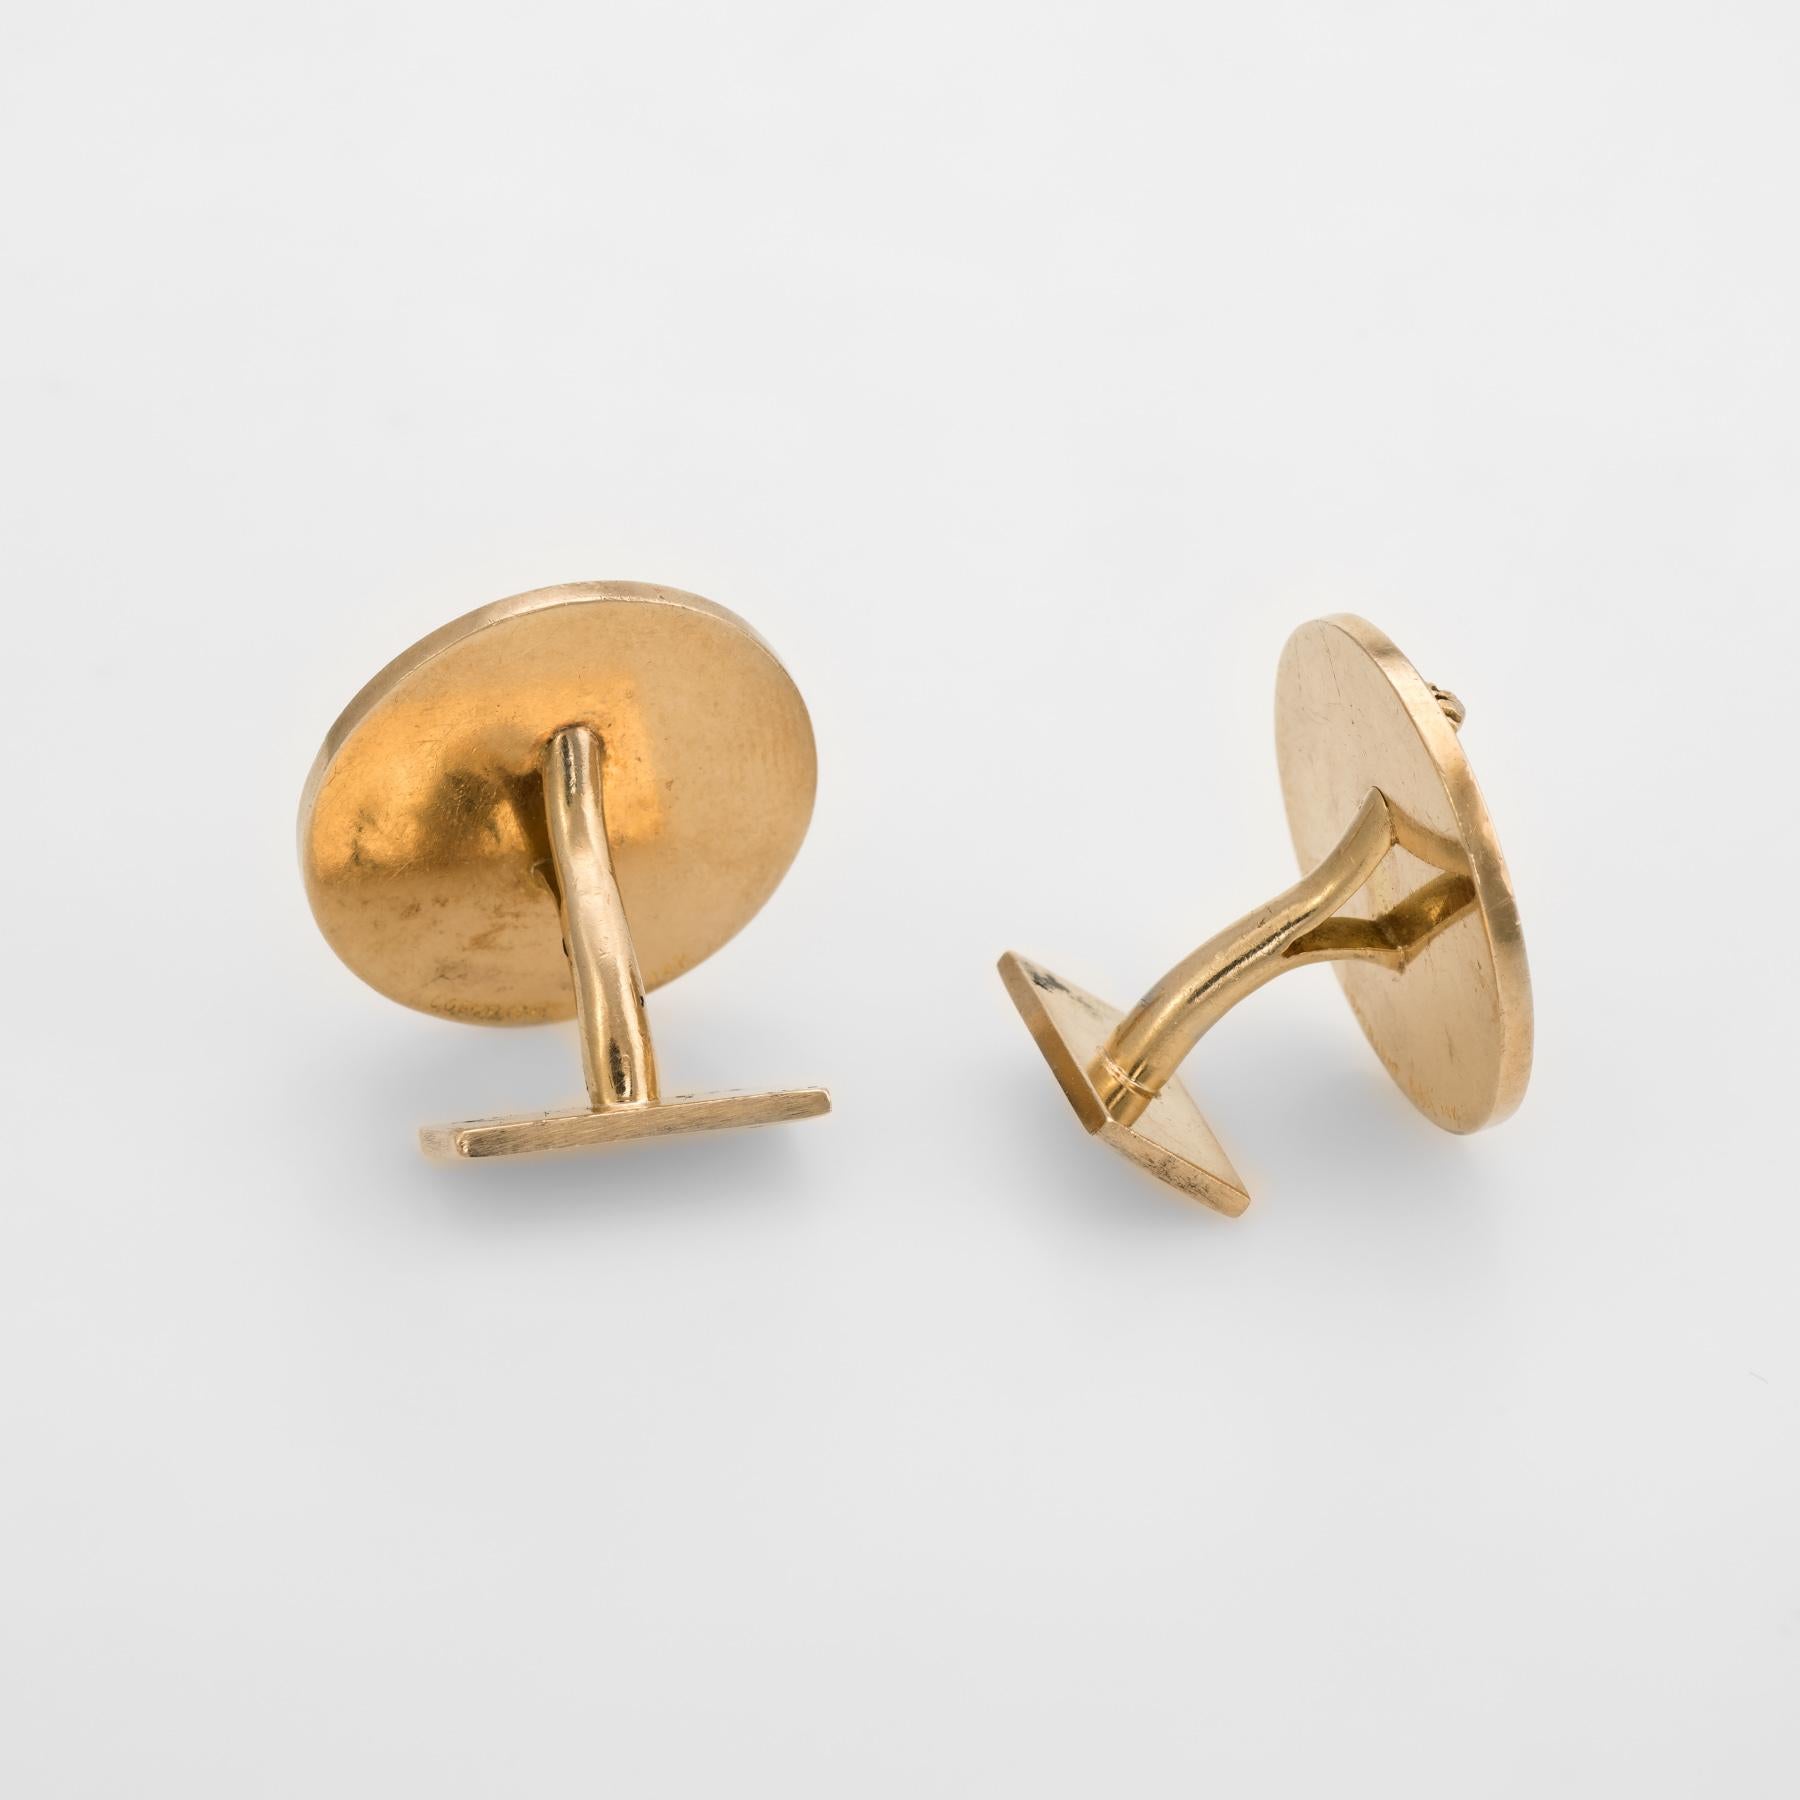 Finely detailed pair of vintage Ruser cufflinks (circa 1950s to 1960s), crafted in 14 karat yellow gold. 

Saint Genesius of Rome is a legendary Christian saint, once a comedian and actor who had performed in plays that mocked Christianity. The